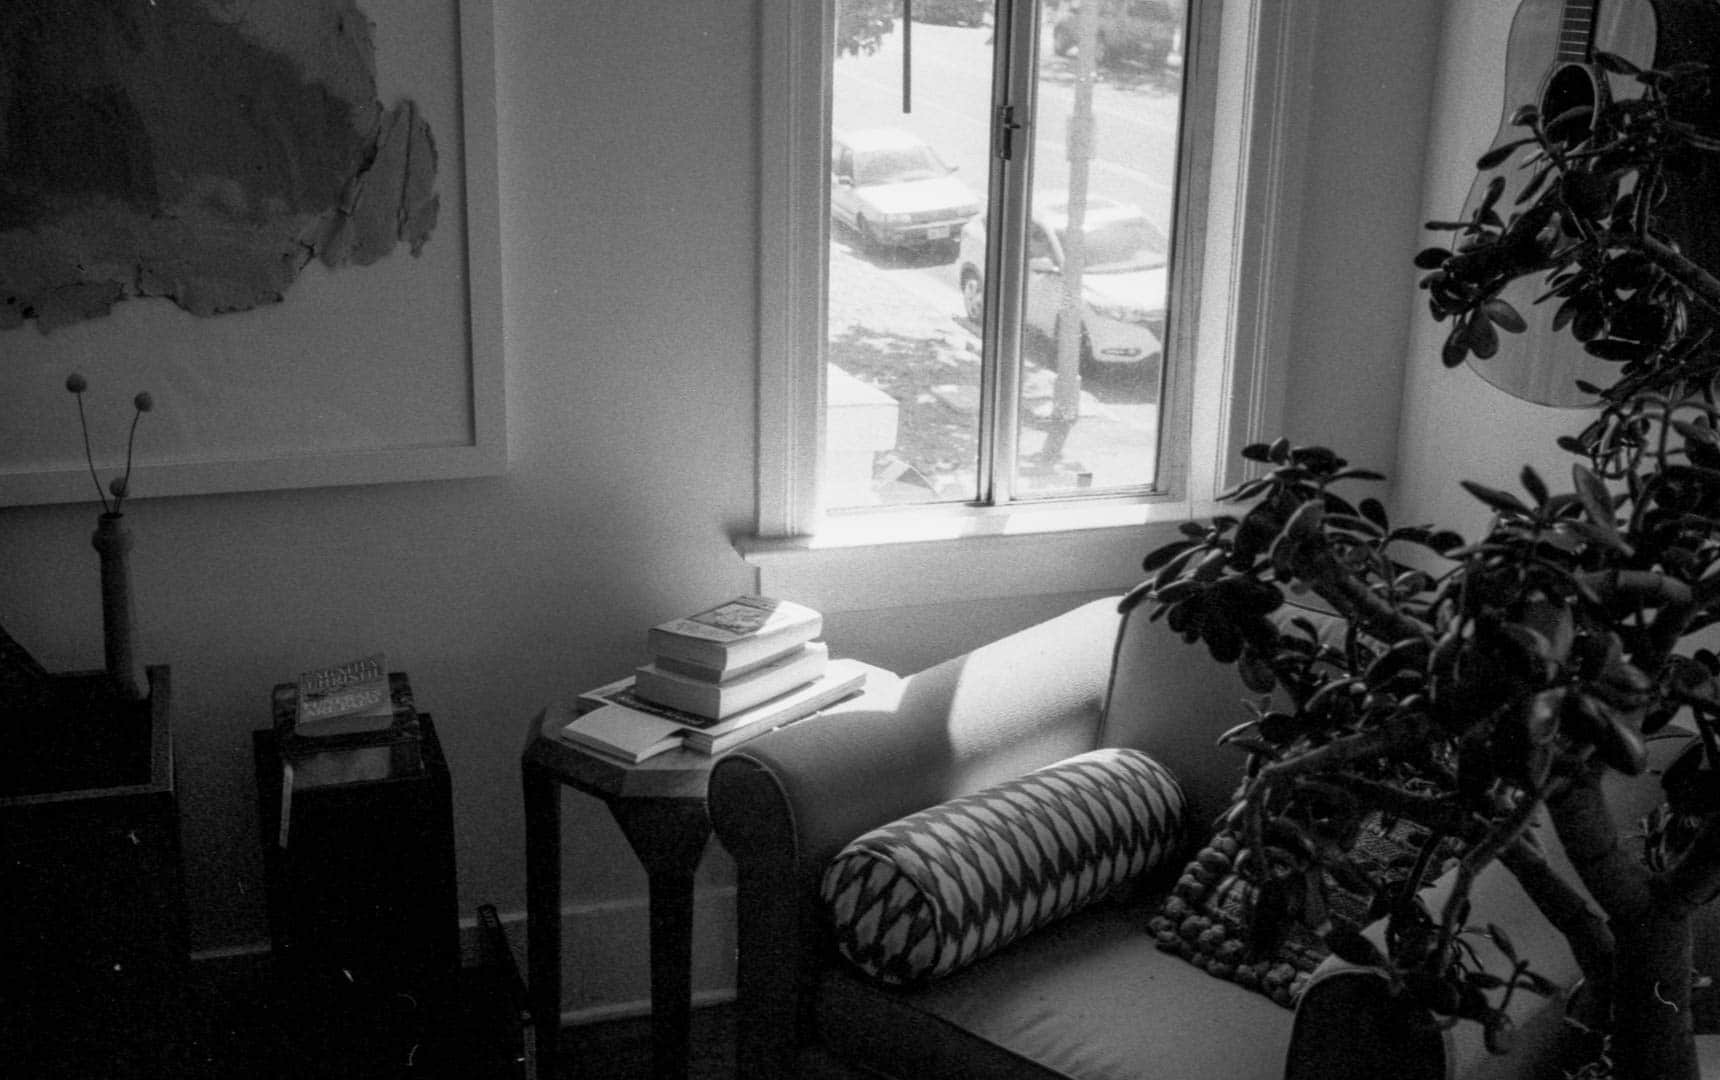 A still life with an upholstered chair in a living room